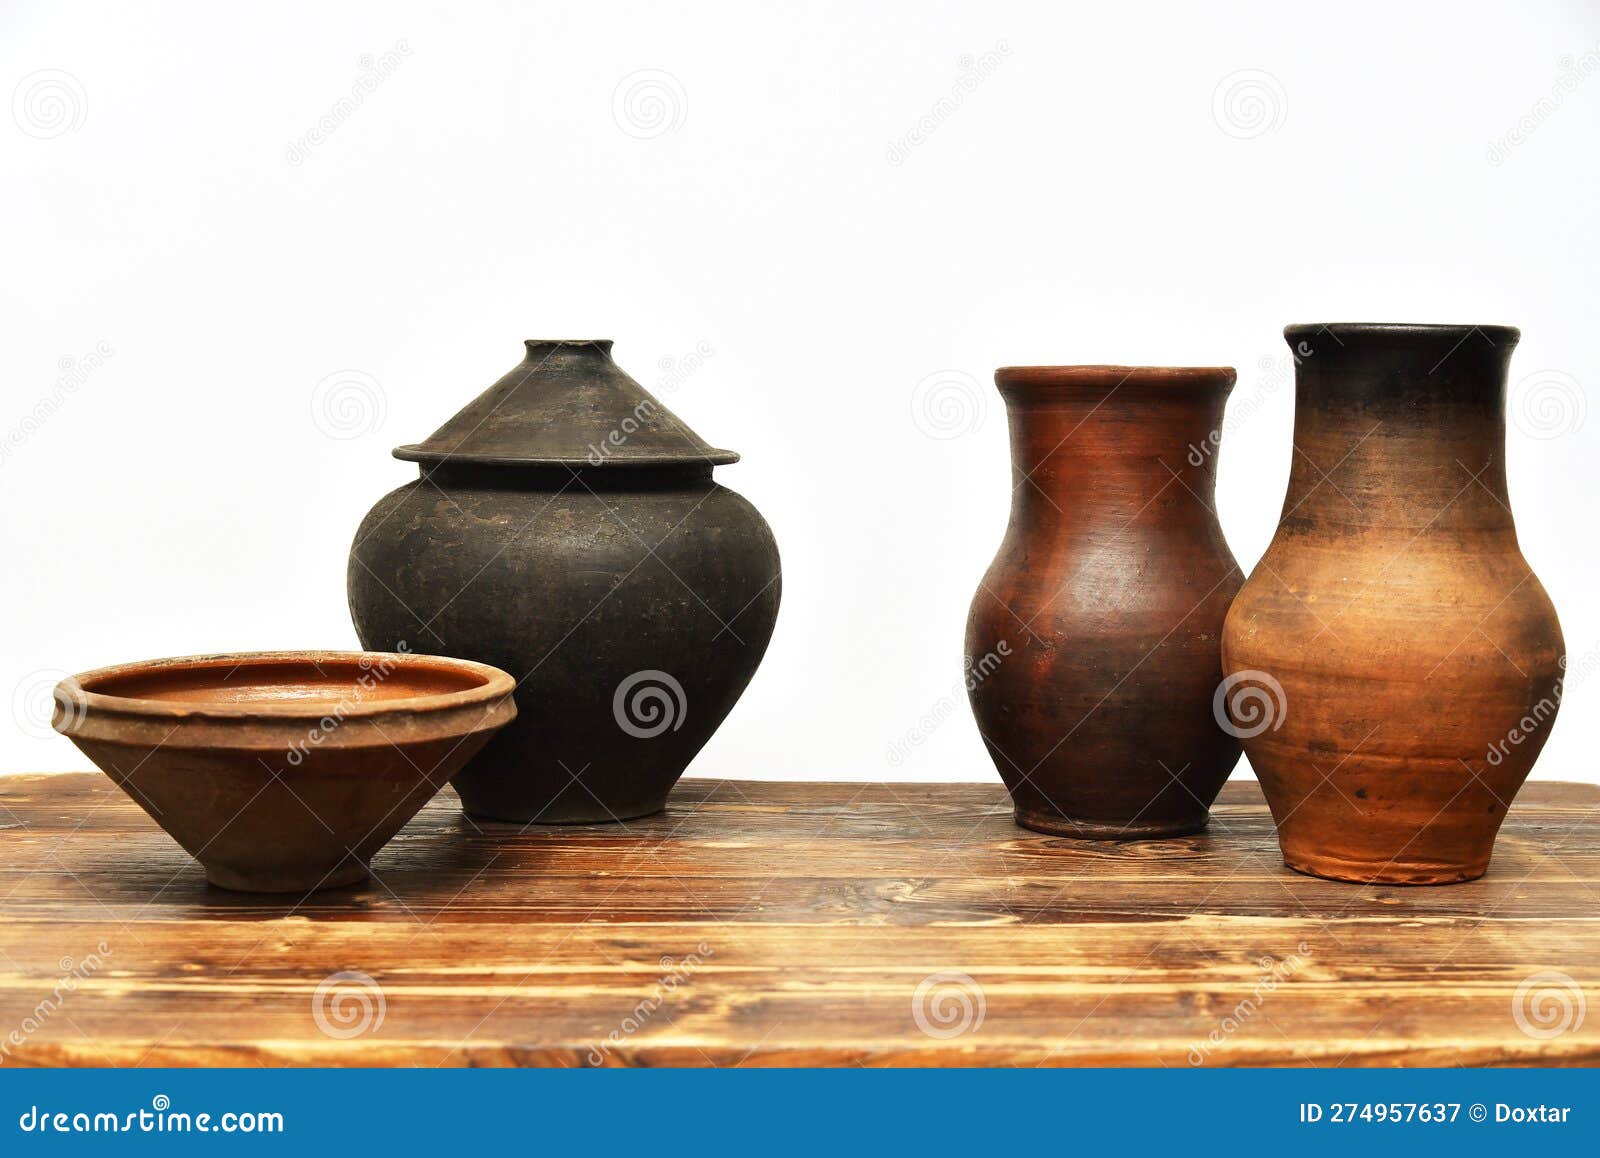 Vintage Earthenware Clay Pots, Bowls and Jugs on a Wooden Table on a White  Background Stock Image - Image of utensils, museum: 274957637